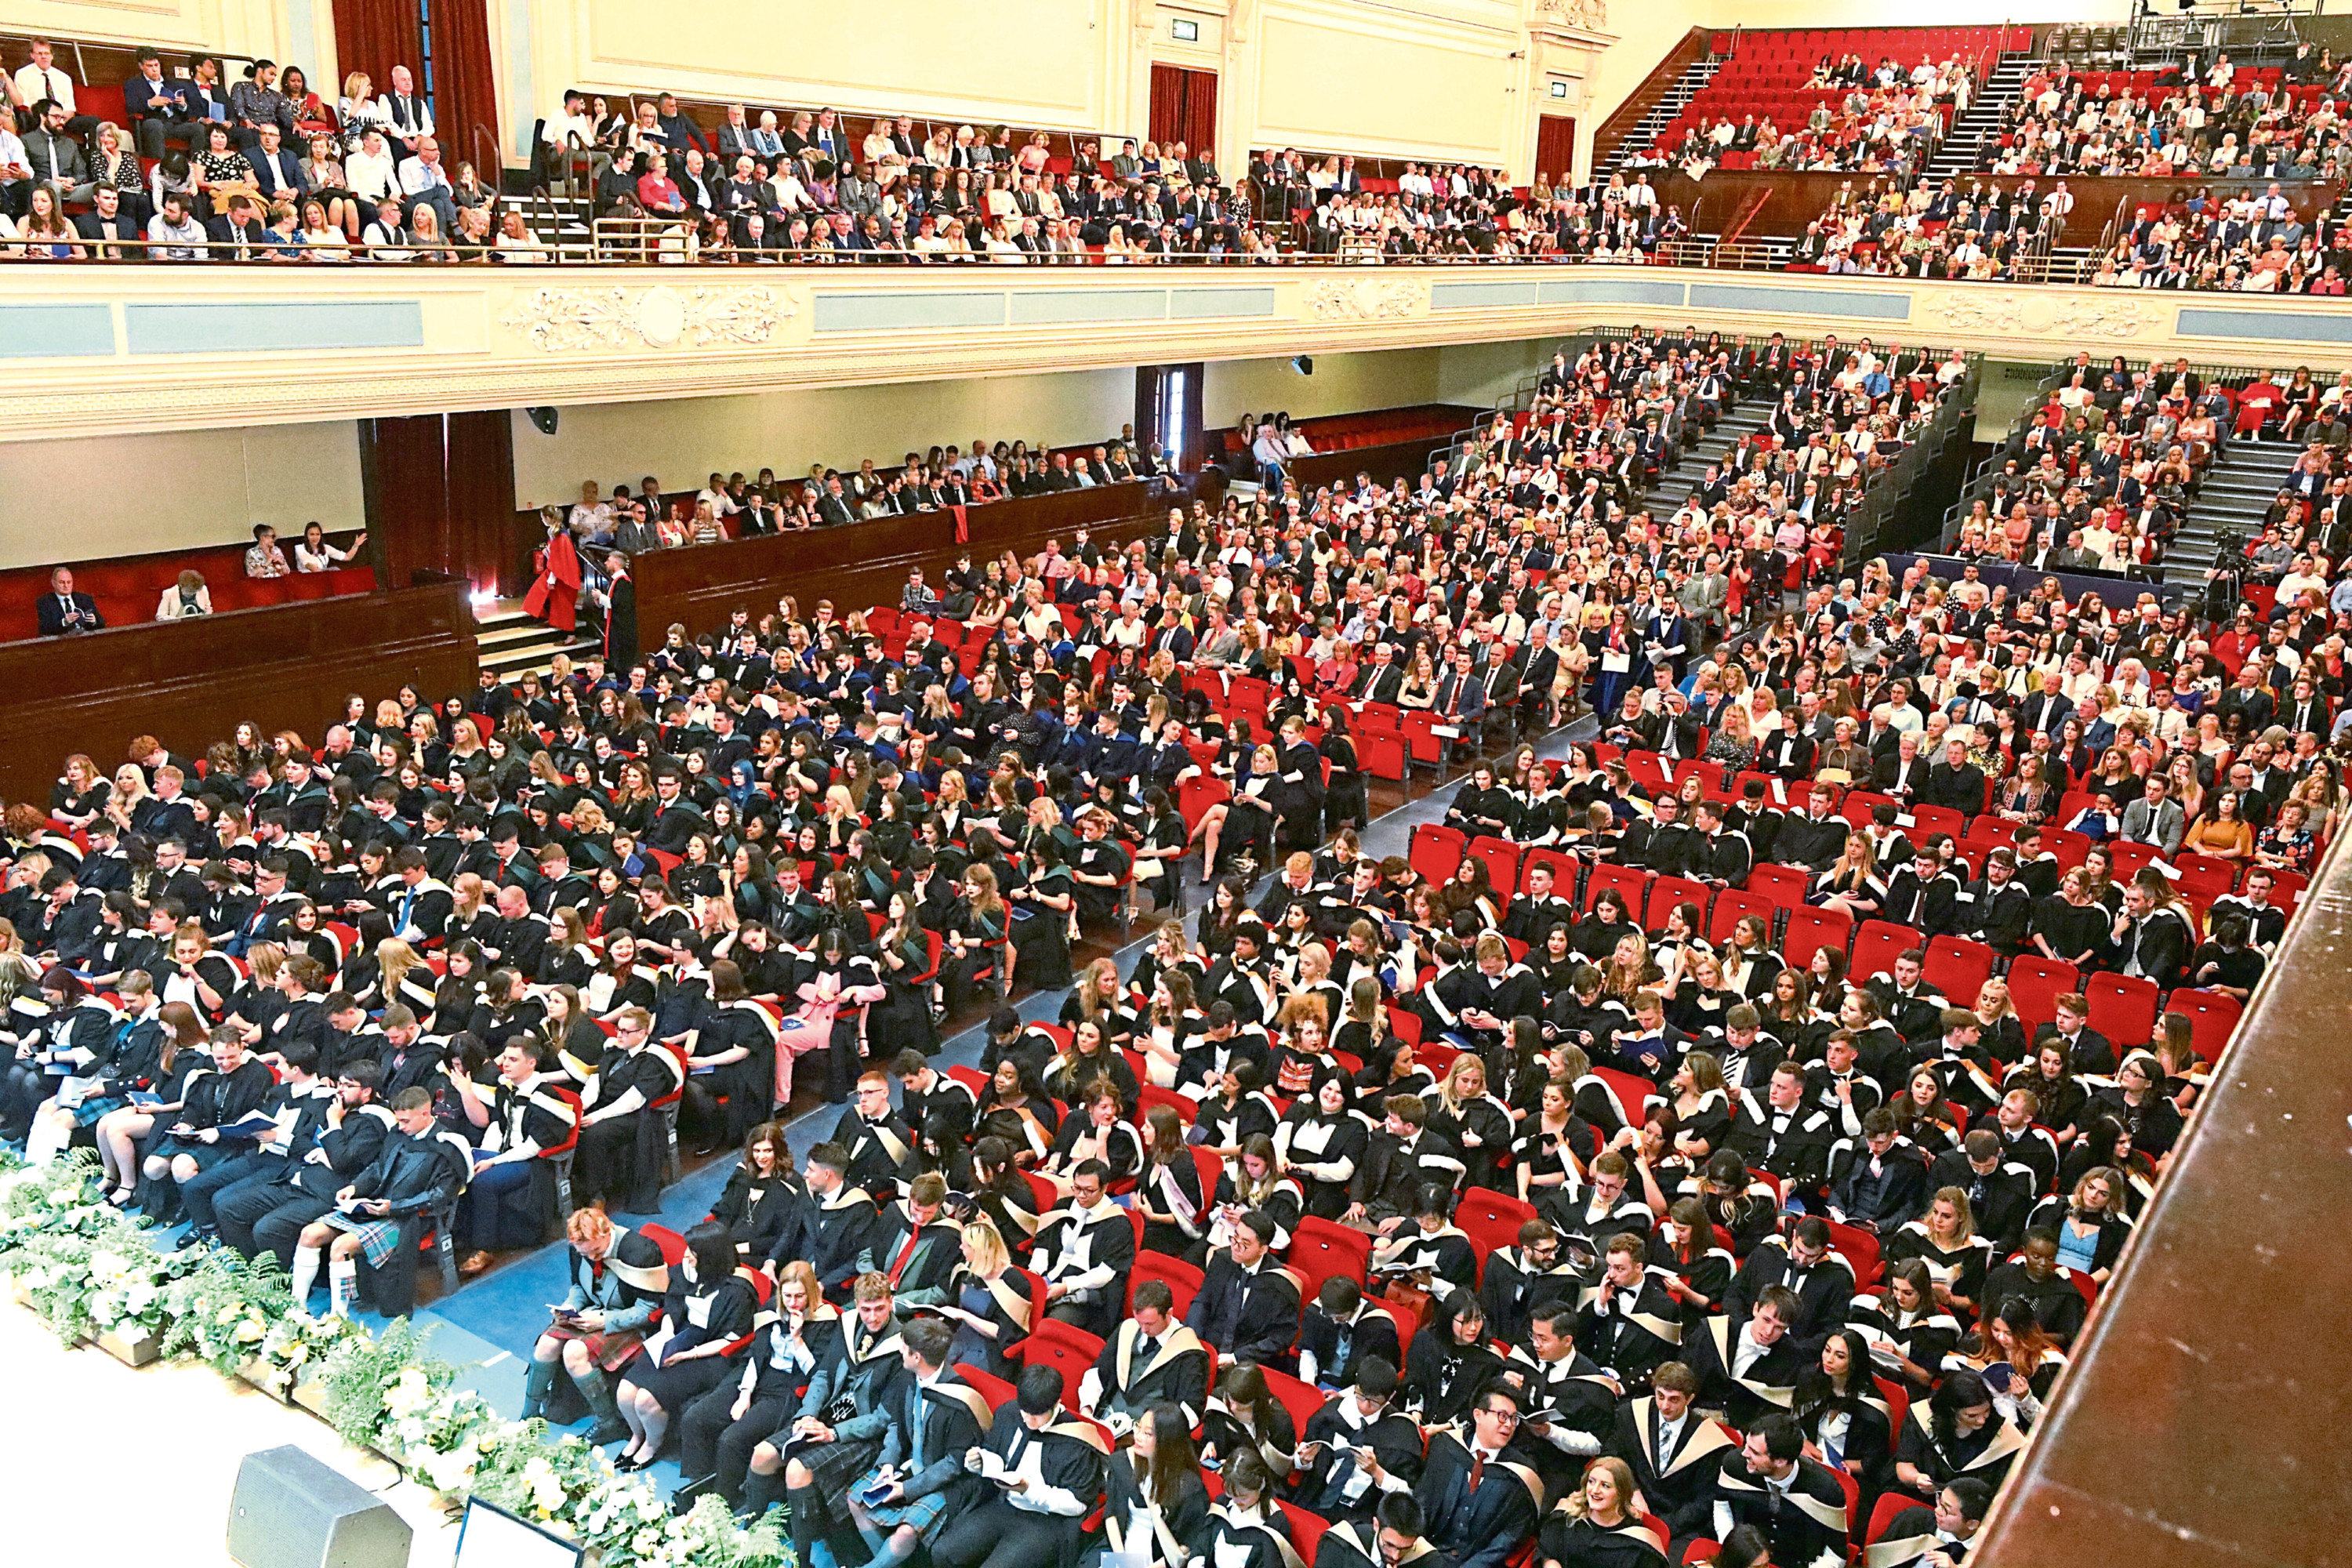 The graduations usually take place in the Caird Hall.